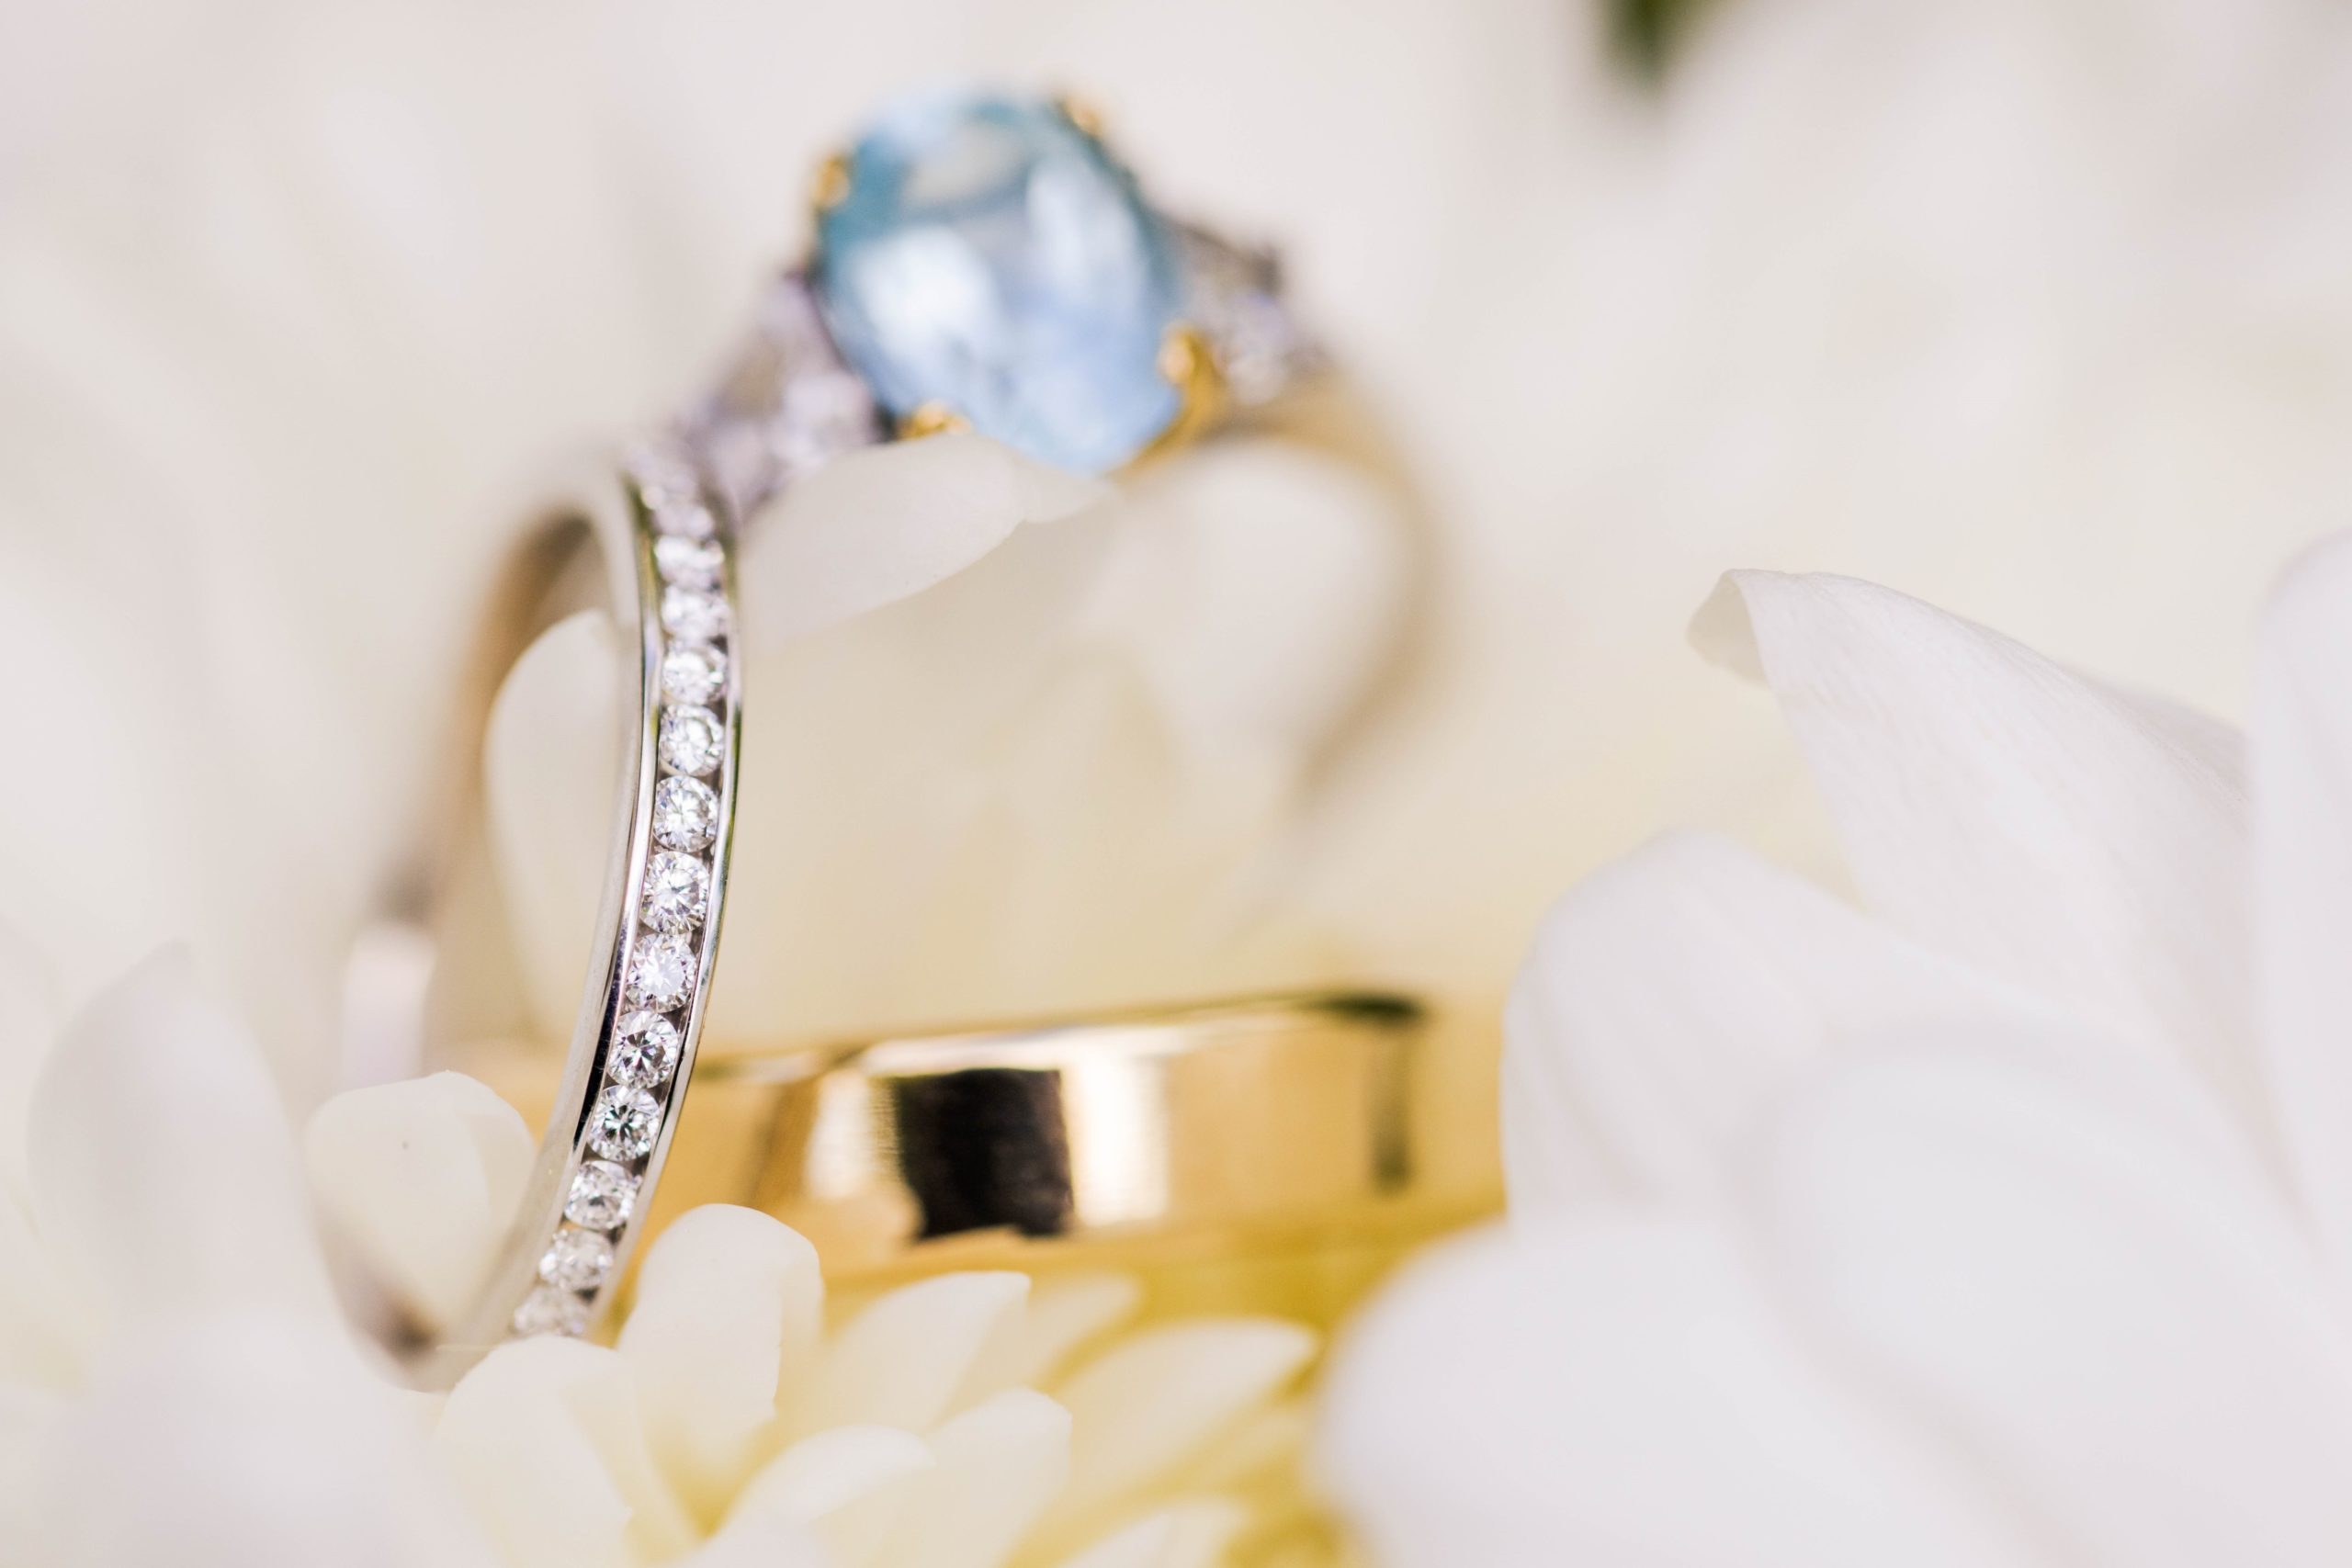 Detailed photos of the 3 wedding rings in the bridal bouquet.